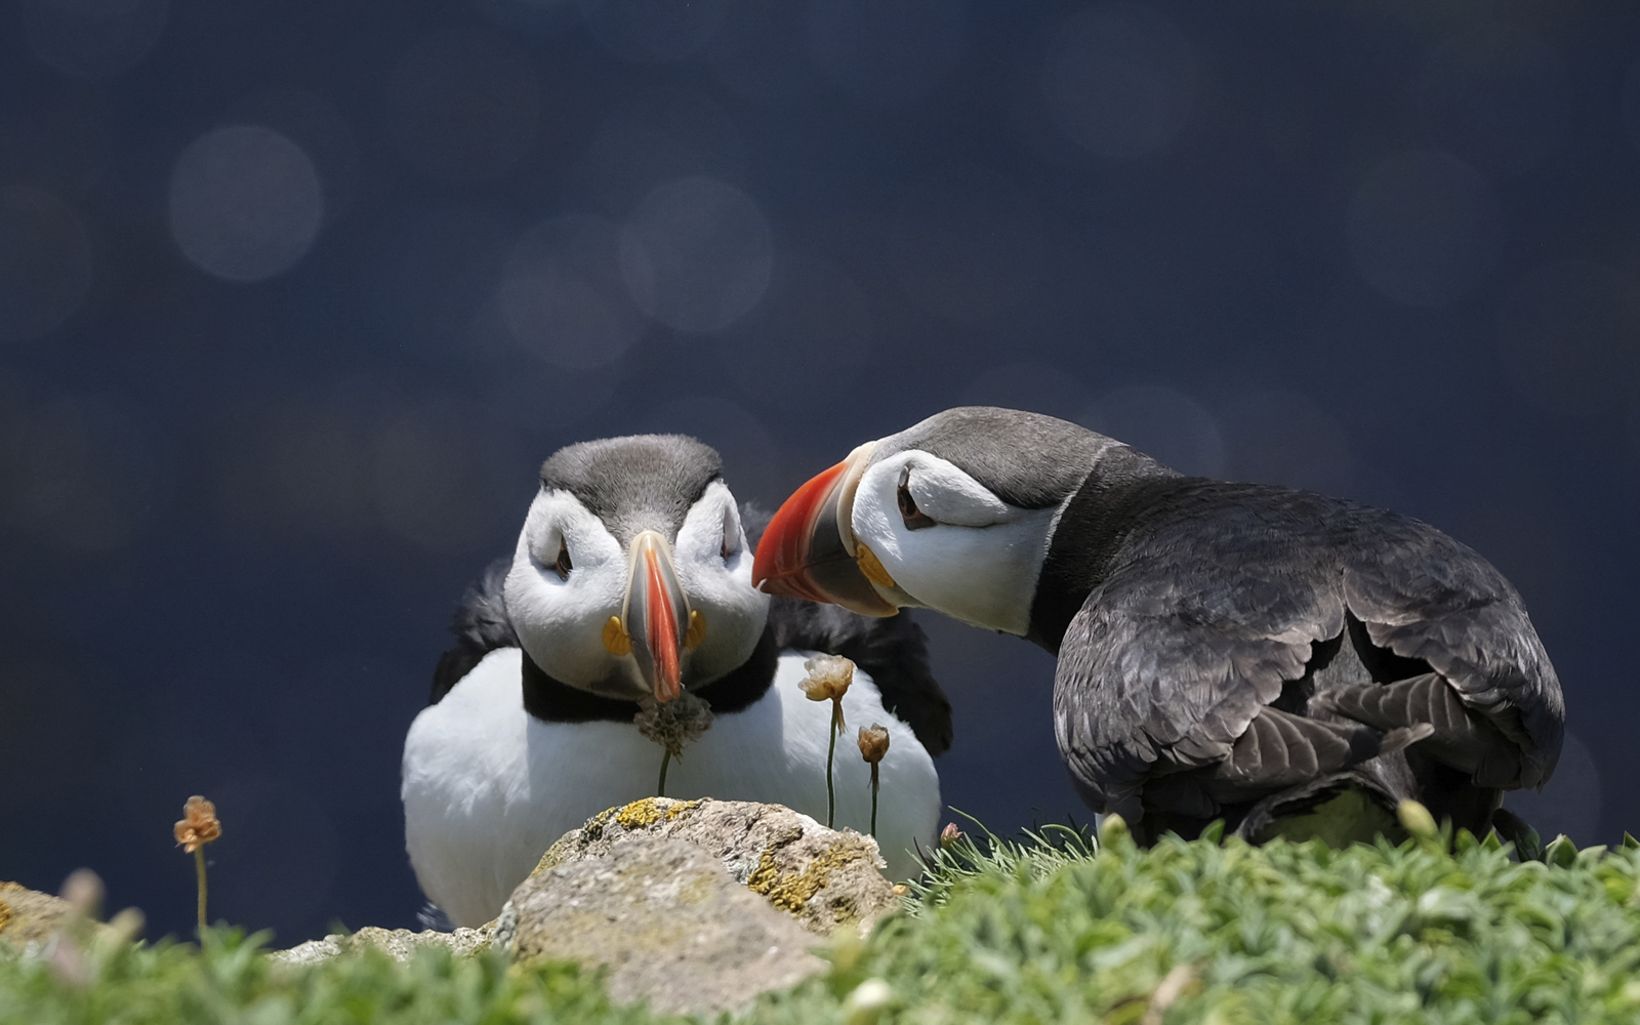 Puffins Islands are synonymous with seabirds. Seabirds are the most threatened of all bird groups and connect small islands to vast oceanic landscapes.  © Ruth Kelly/TNC Photo Contest 2019